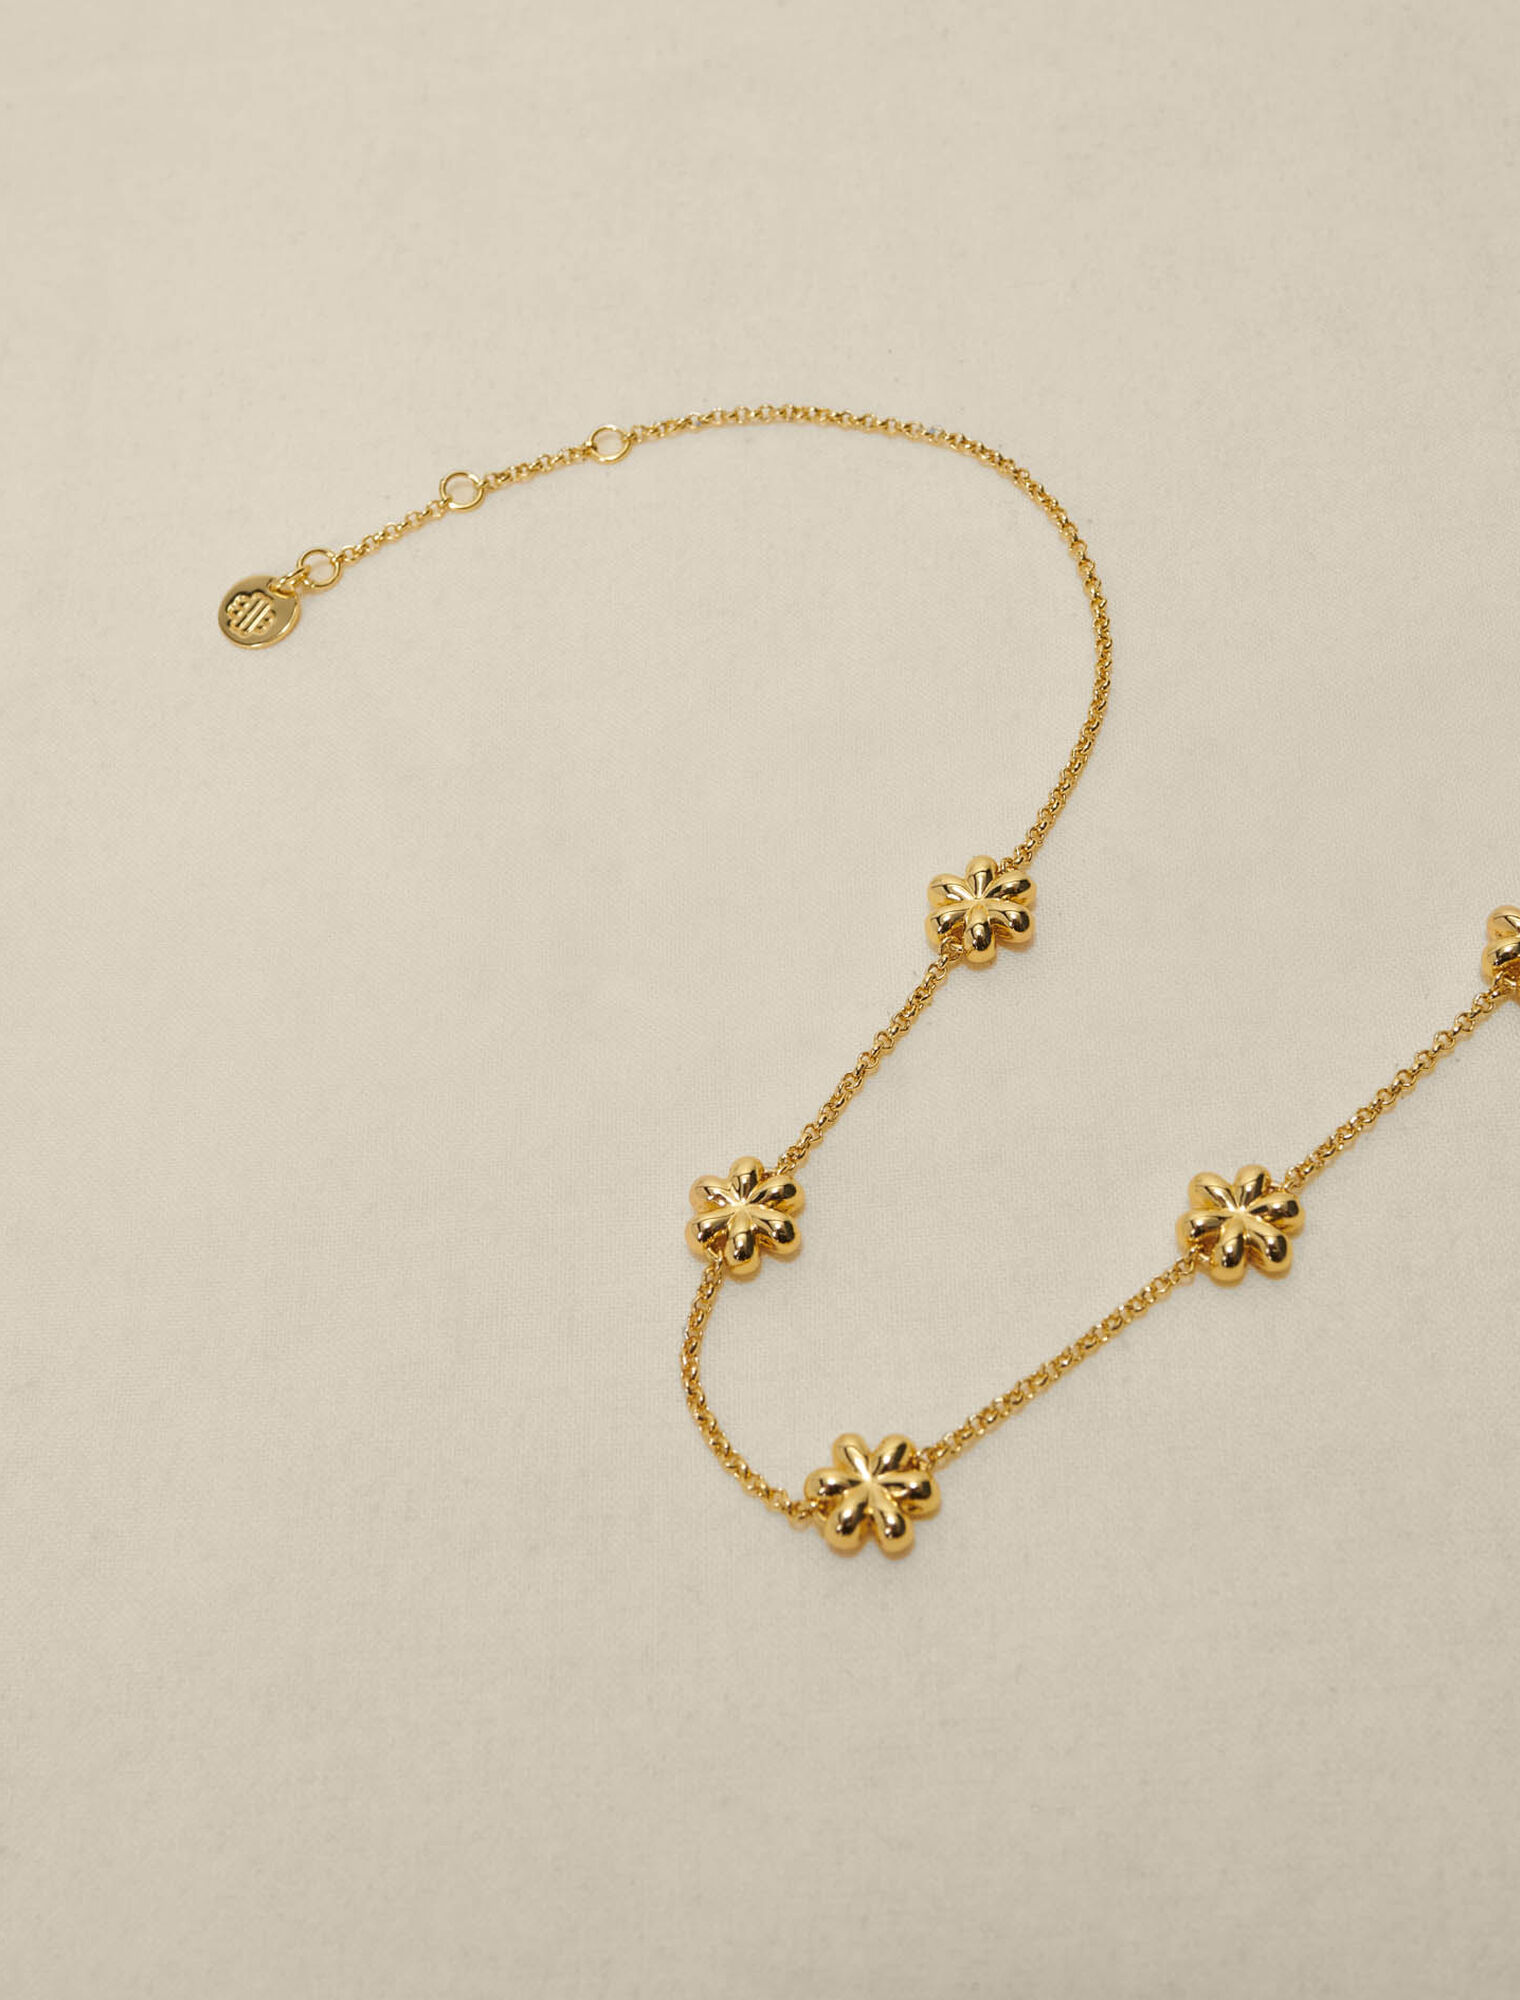 Flower chain necklace